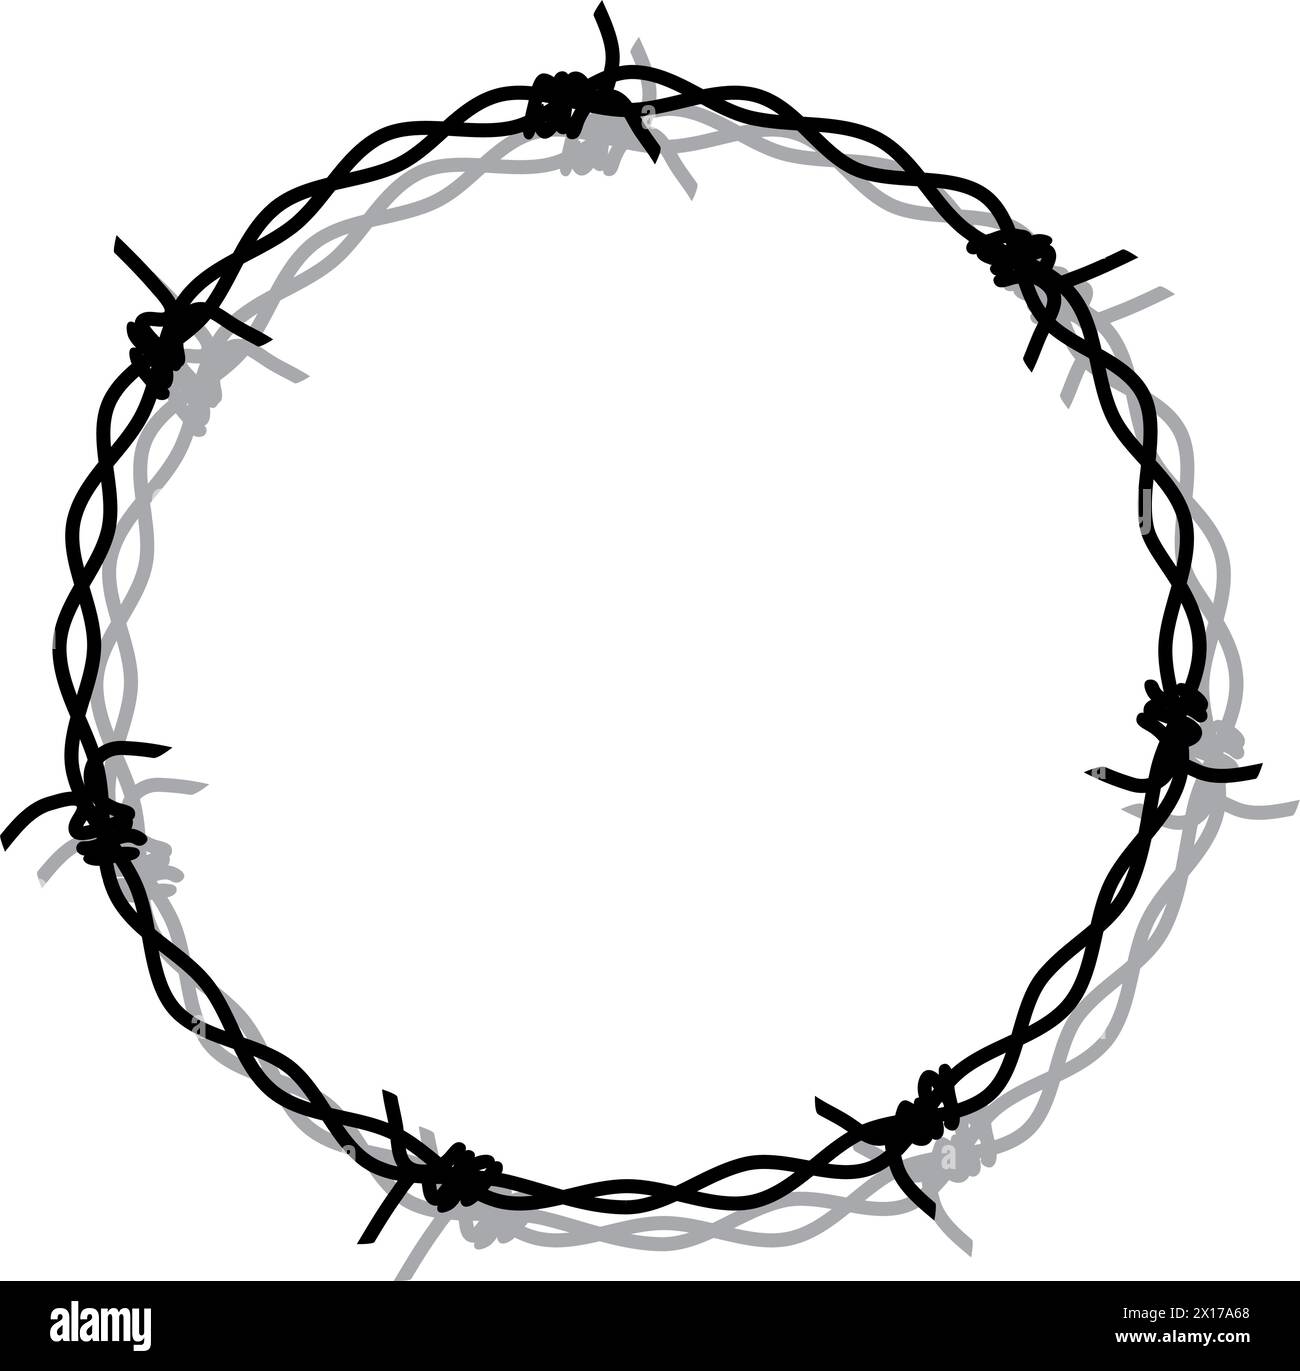 vector hand drawing of barbed wire prison boundary. barbed wire round frame border with shadow Stock Vector